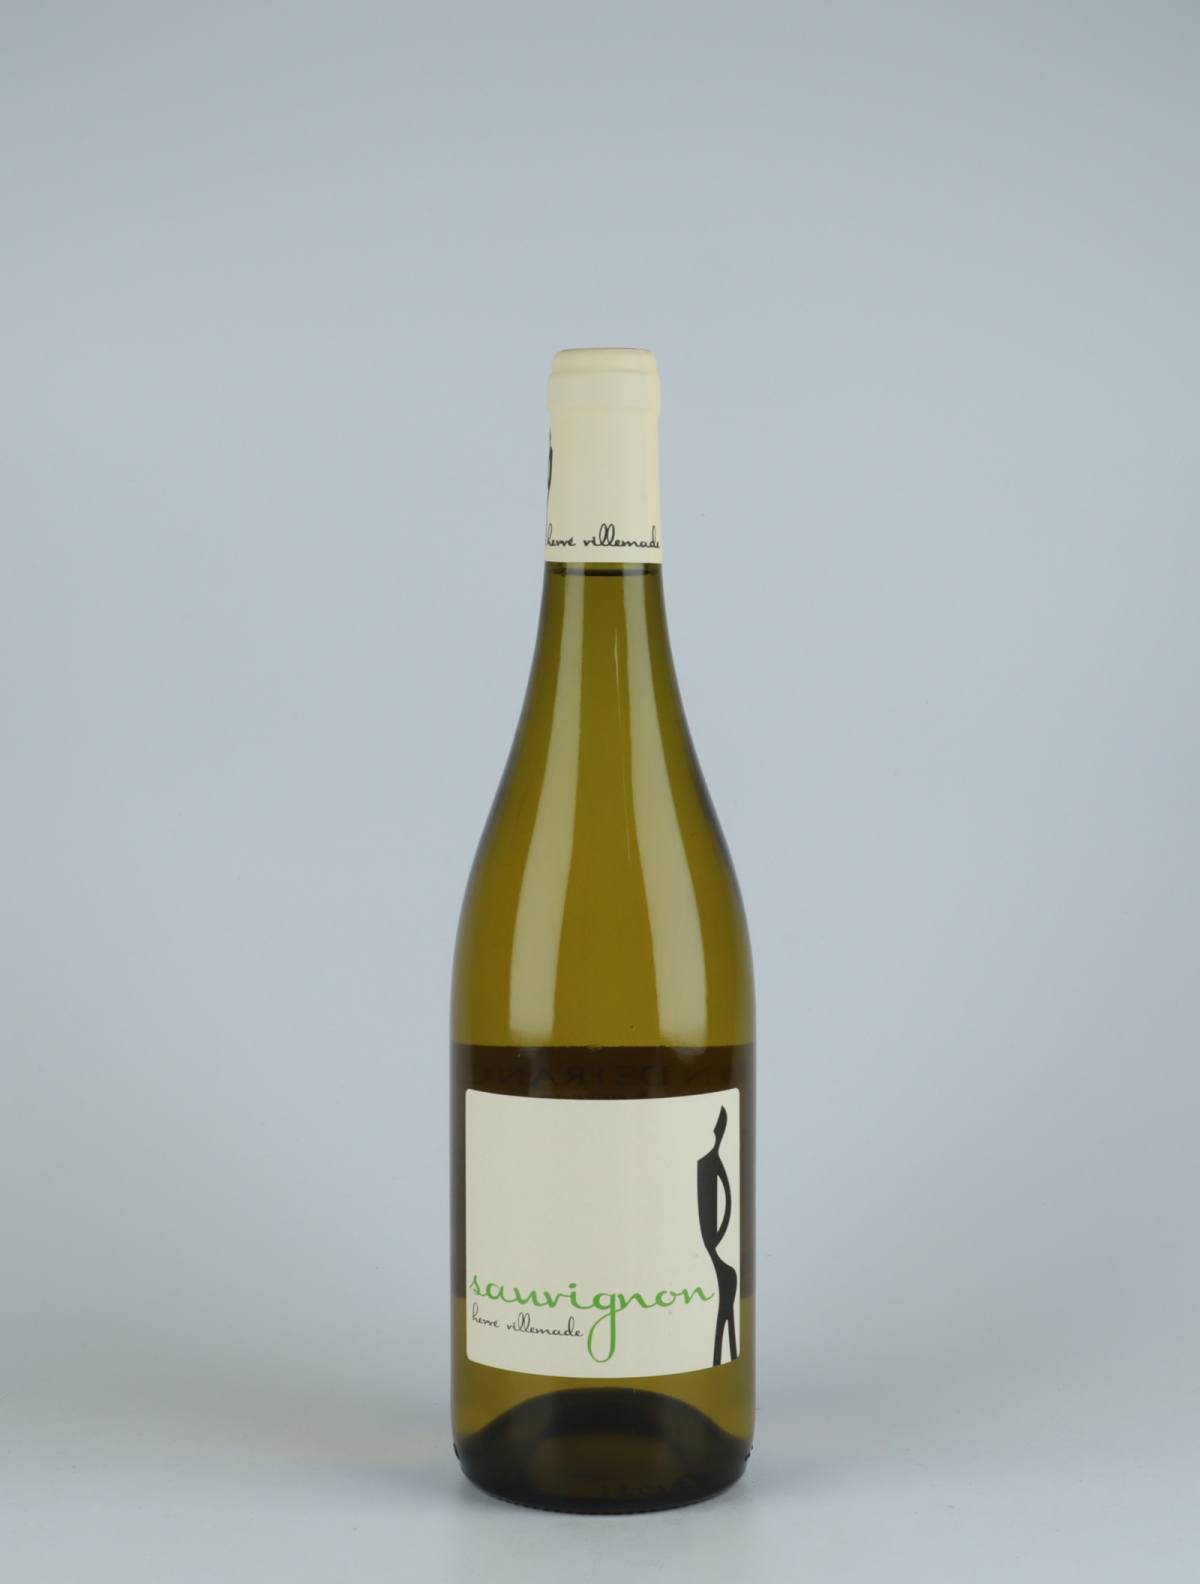 A bottle 2020 Sauvignon Blanc White wine from Hervé Villemade, Loire in France